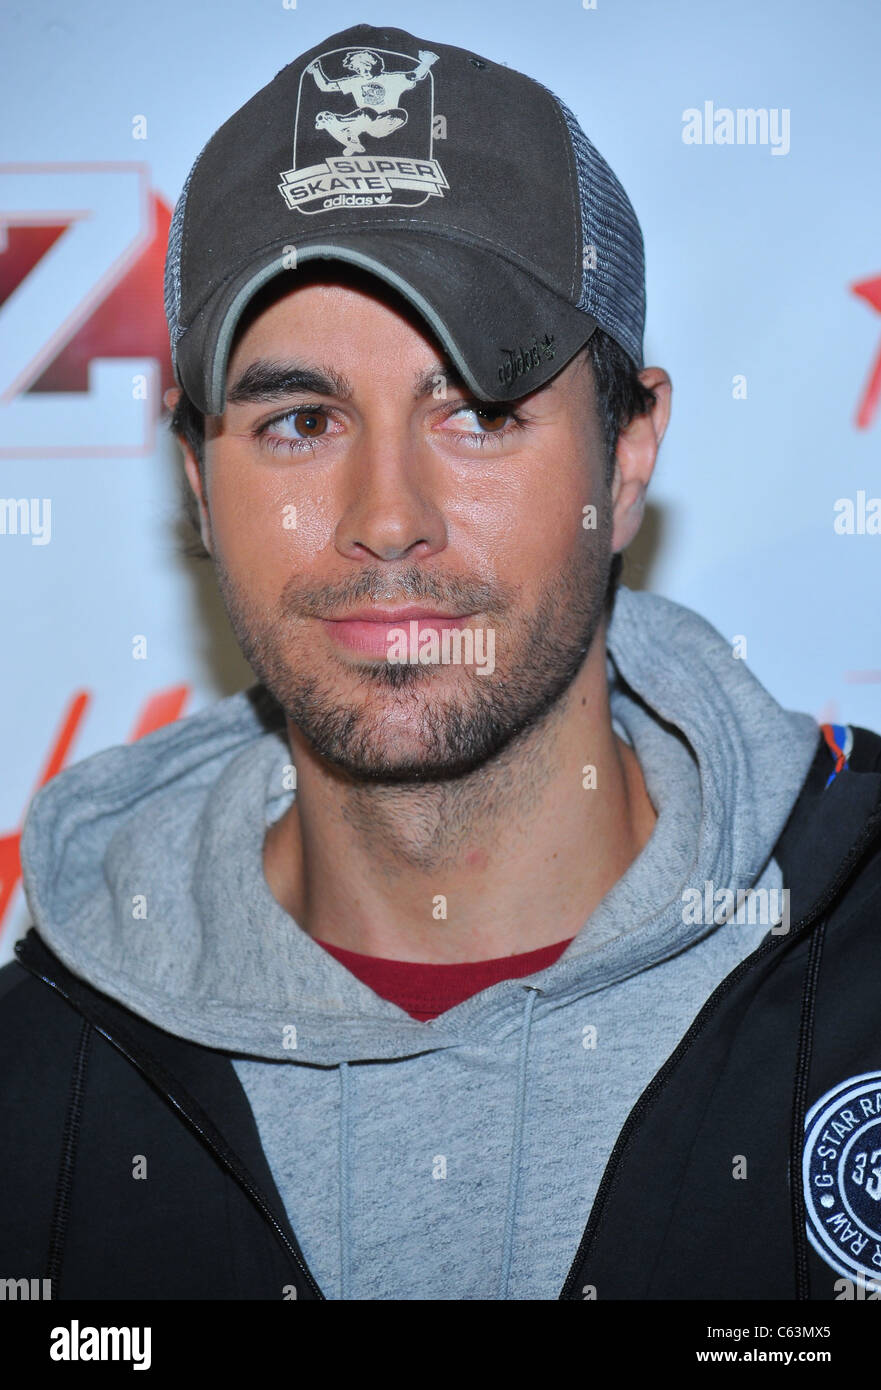 Enrique Iglesias in attendance for The Z100 Jingle Ball 2010 Presented by  H&M, Madison Square Garden, New York, NY December 10 Stock Photo - Alamy